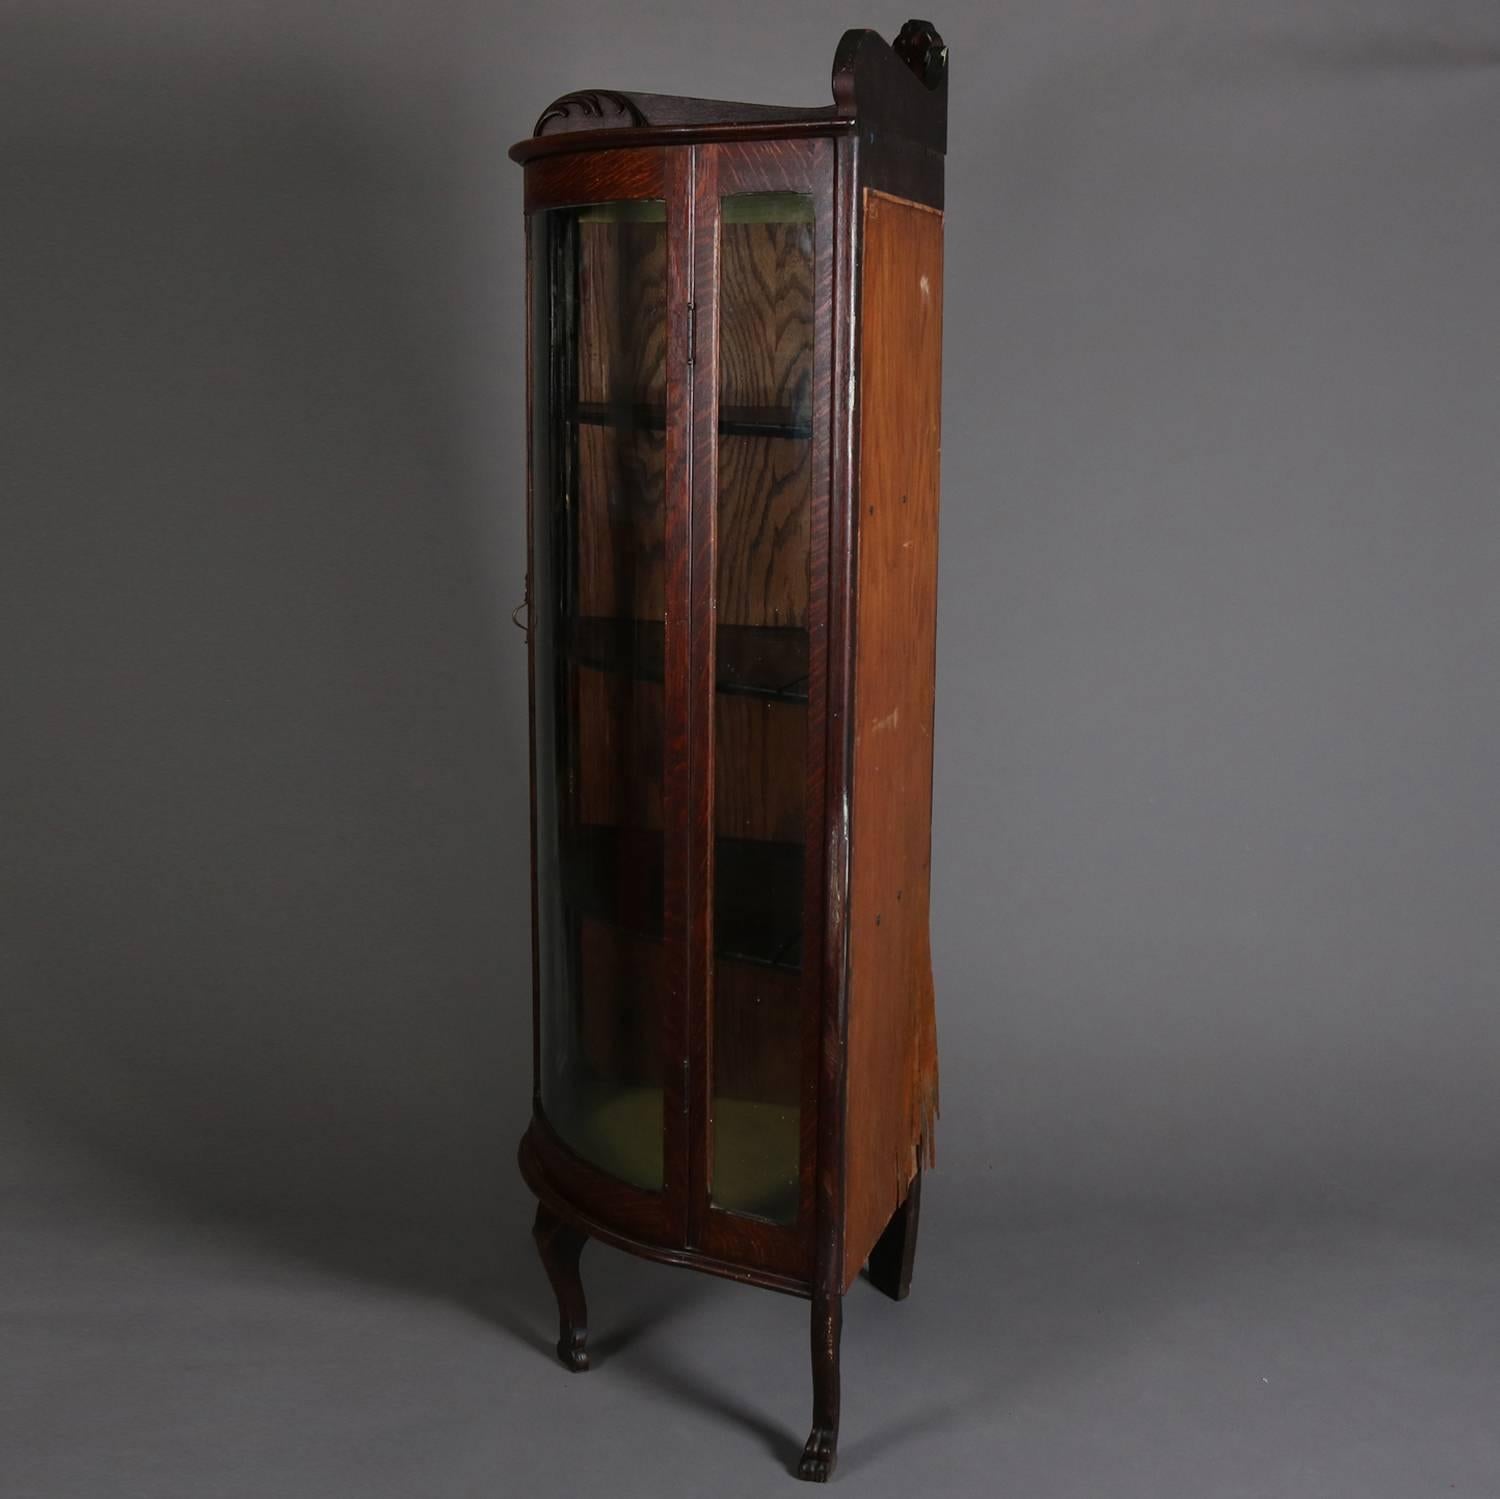 Antique R. J. Horner School oak corner china cabinet features carved foliate decoration and are seated on paw feet, single curved glass door open to fixed shelved interior with plate reservoirs, circa 1900.

Measures: 67